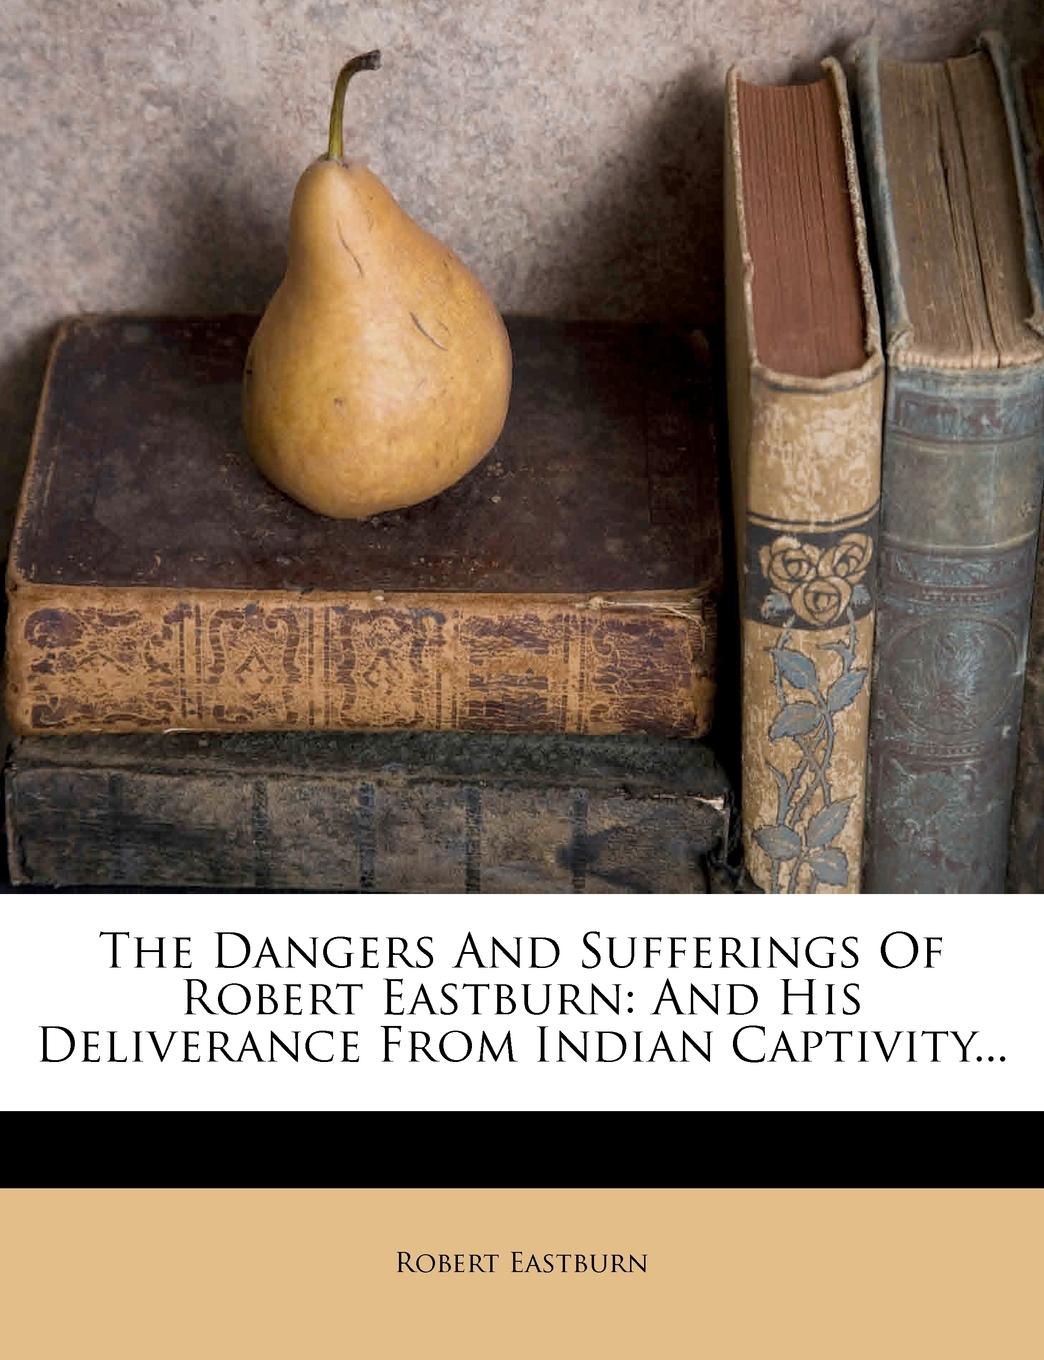 The Dangers And Sufferings Of Robert Eastburn. And His Deliverance From Indian Captivity...